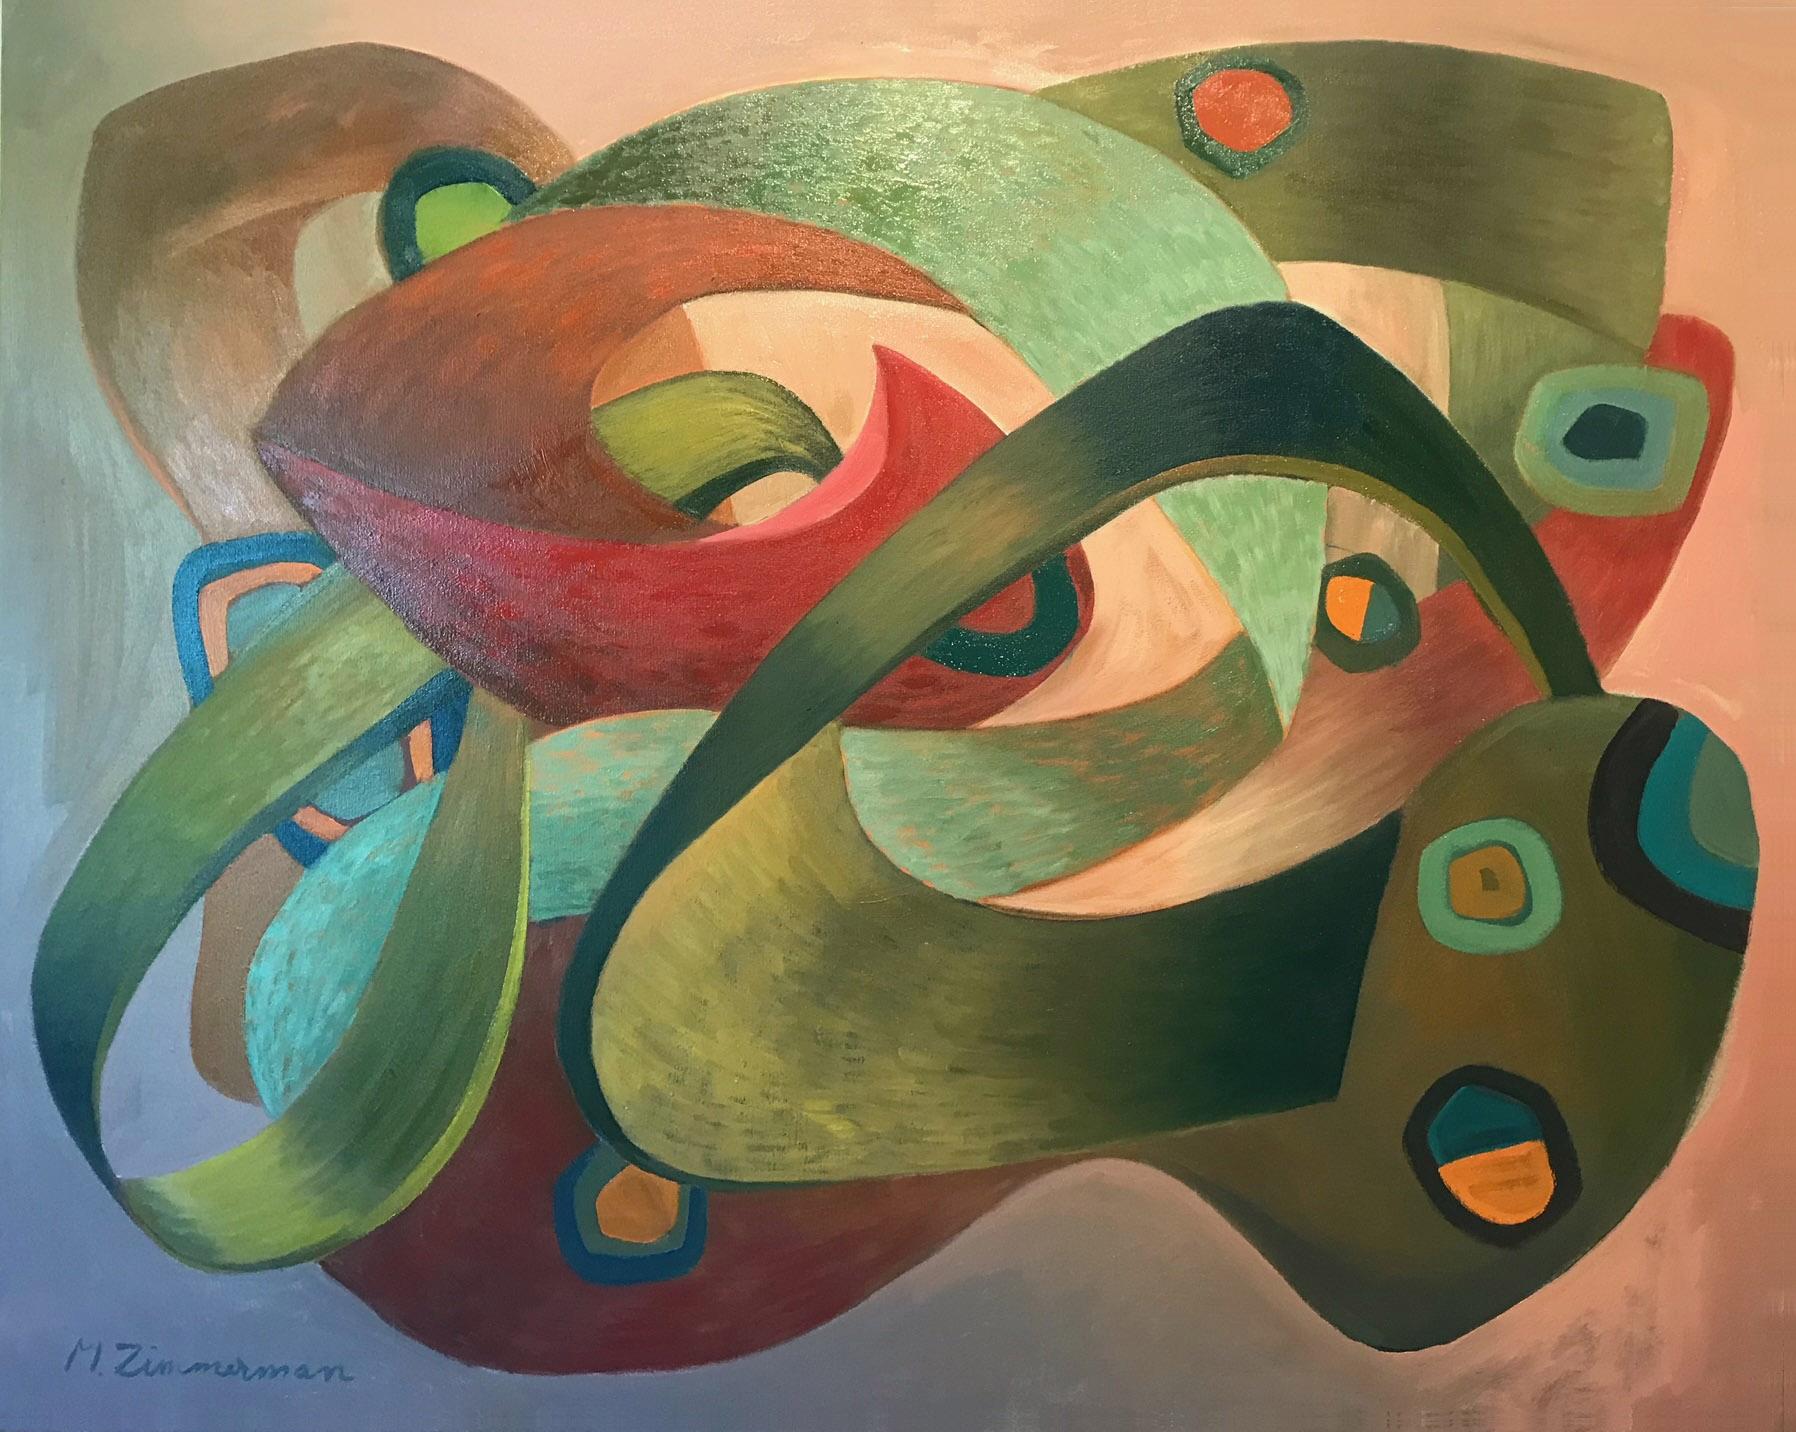 Unwind Unfolds - Red & Green Abstract Painting by Marc

This masterpiece is exhibited in the Zimmerman Gallery, Carmel CA.

Marc Zimmerman creates playful paintings, whether deep mysterious jungle or delightfully whimsical florals. His color palette